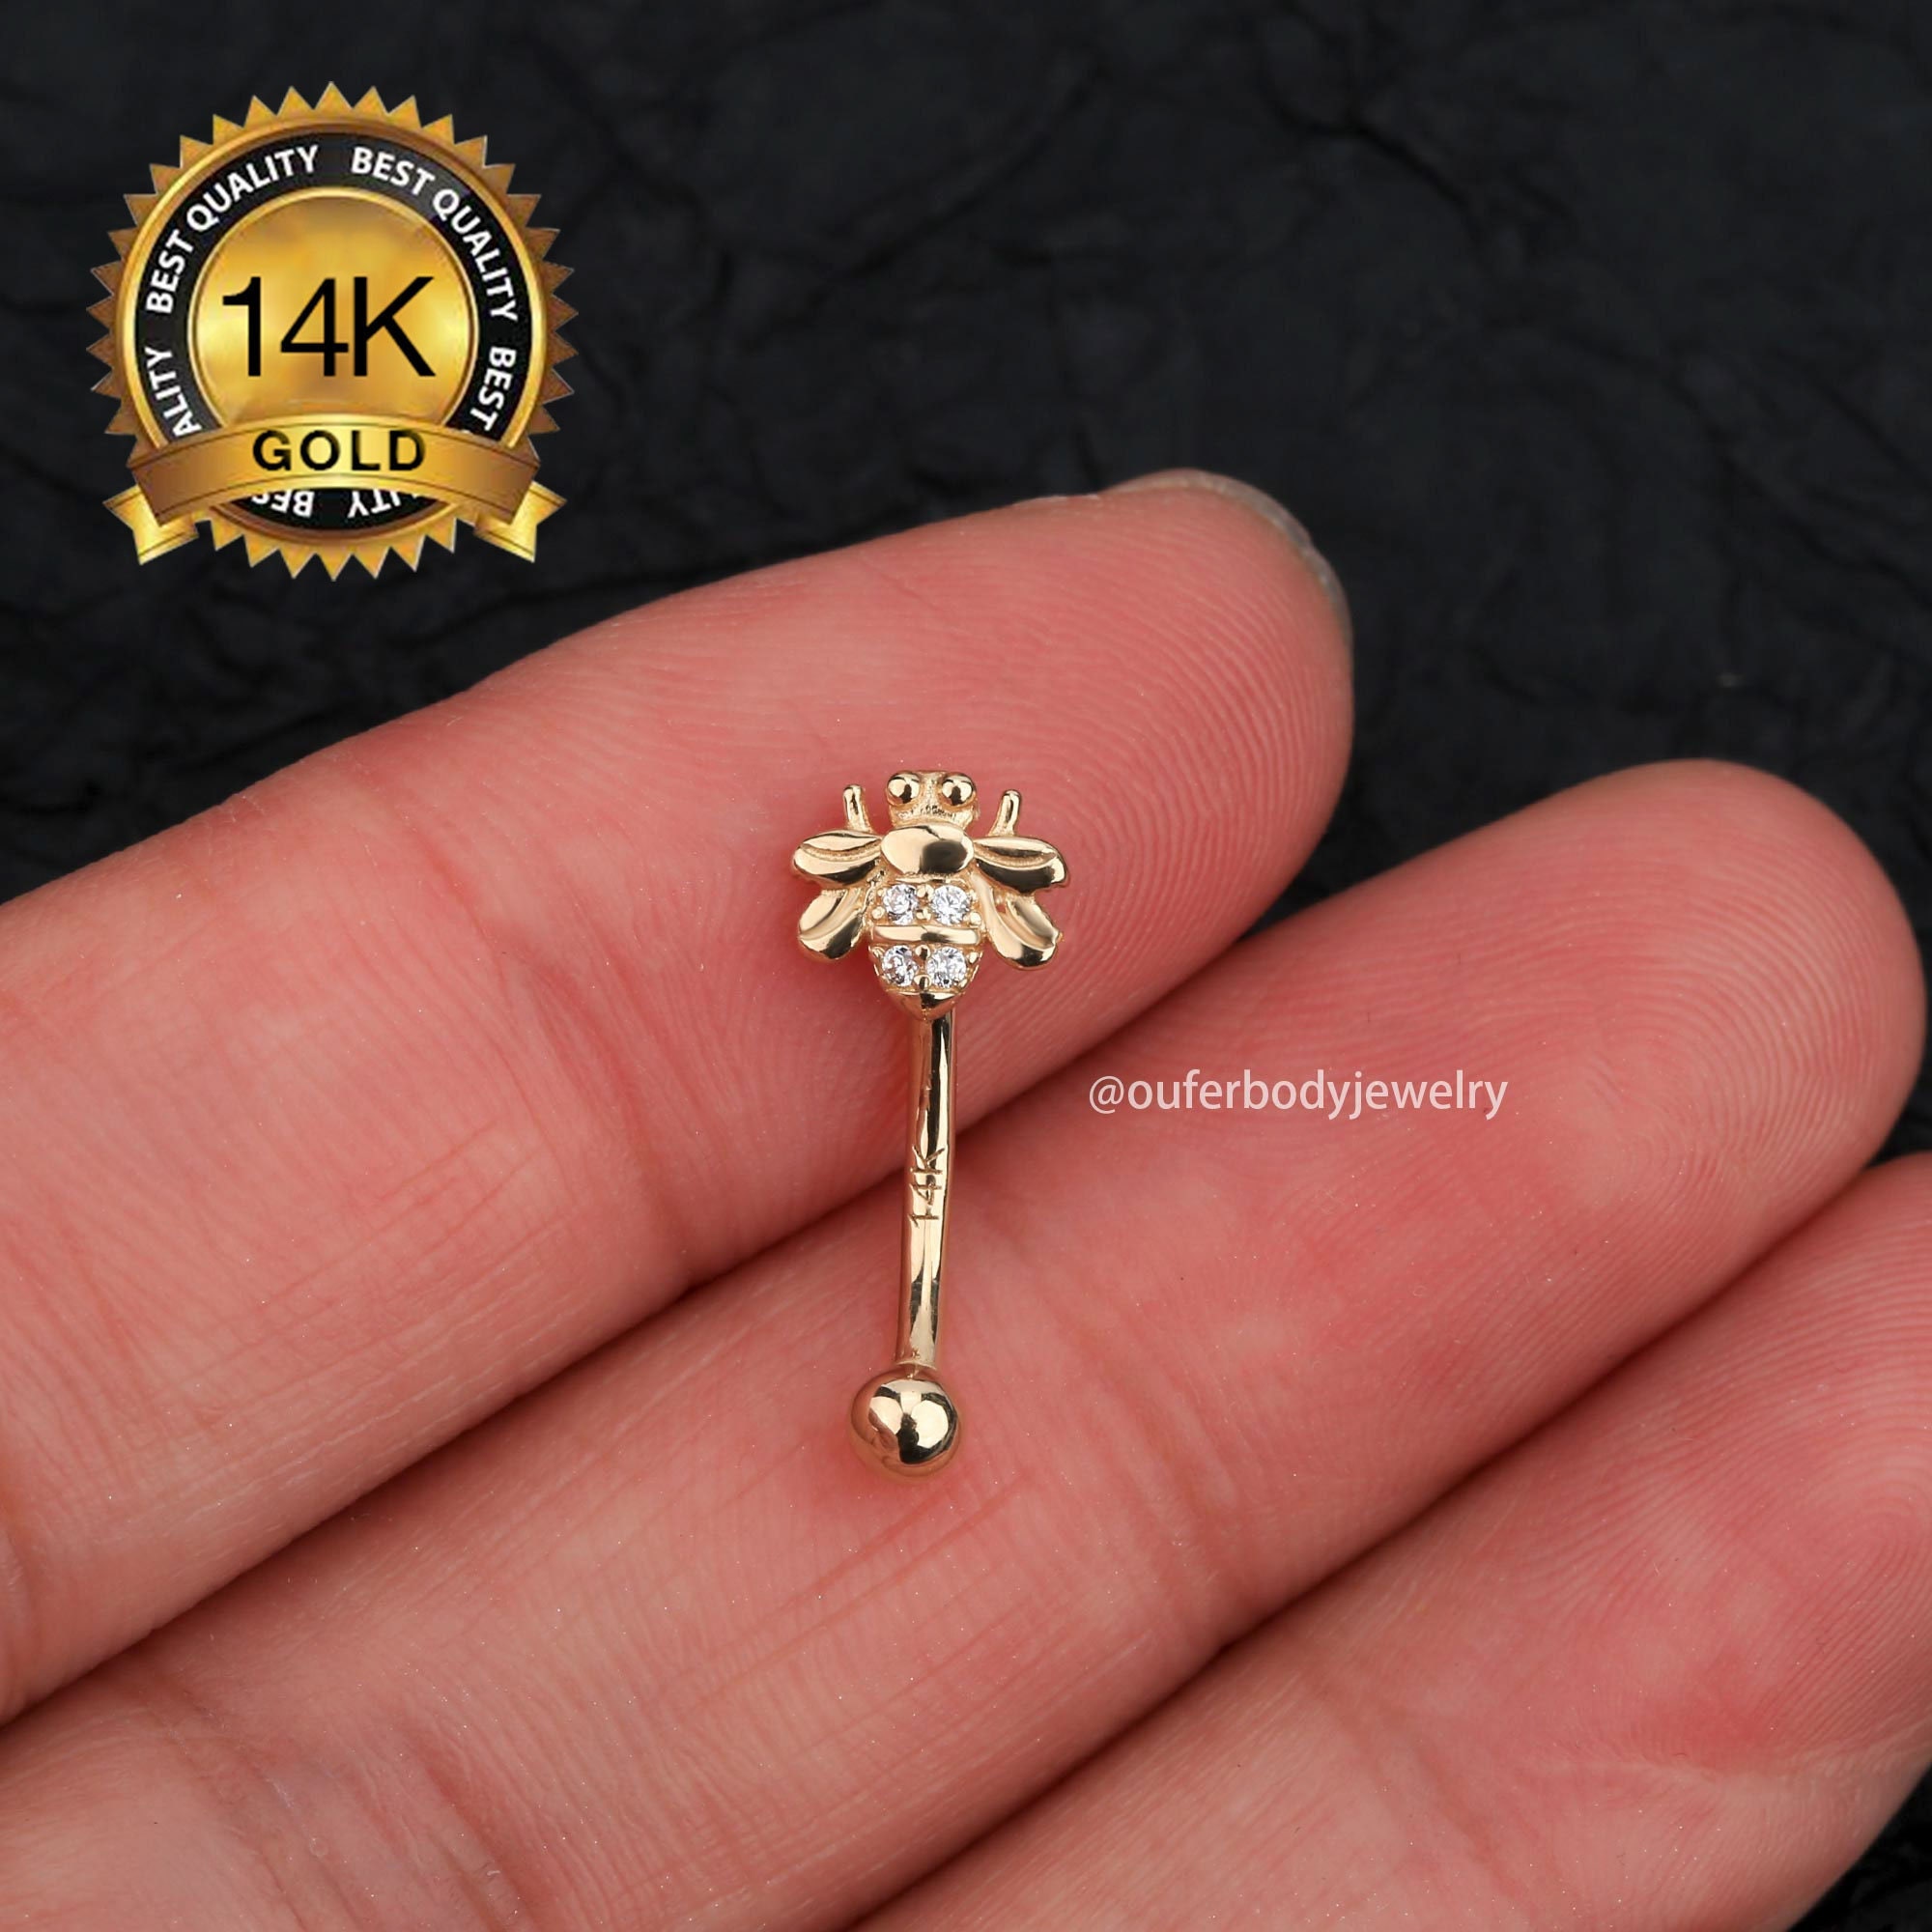 OUFER 14K Gold Rook Eyebrow Ring, Flower Eyebrow Rook Earring, CZ Diamond Rook Earring, 16g 6mm Curved Barbell, Eyebrow Rook Piercing Ring for Women